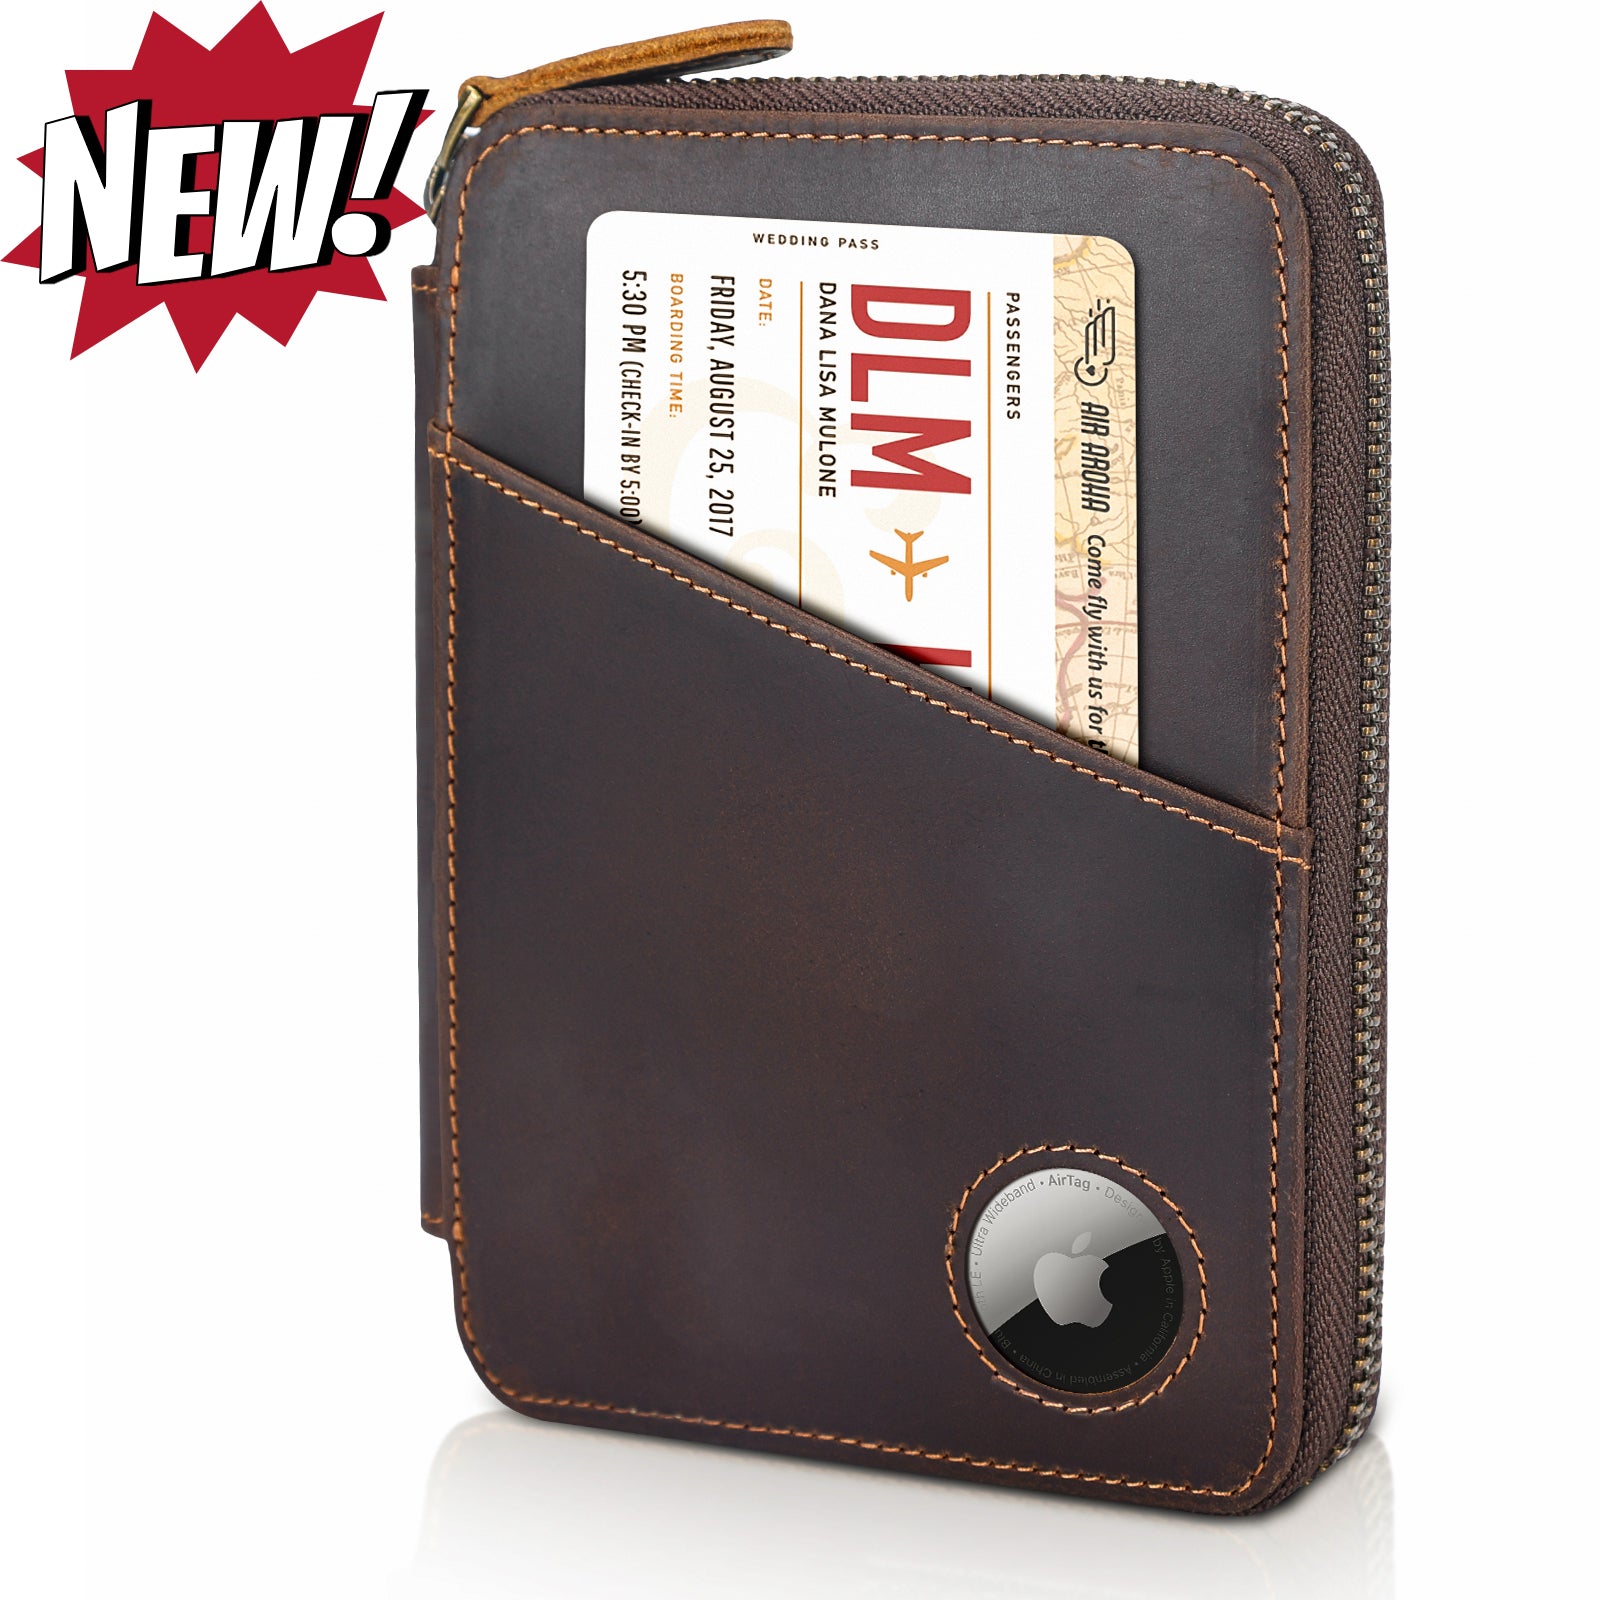 Full Grain Leather RFID Blocking Passport Wallet with AirTag Slot